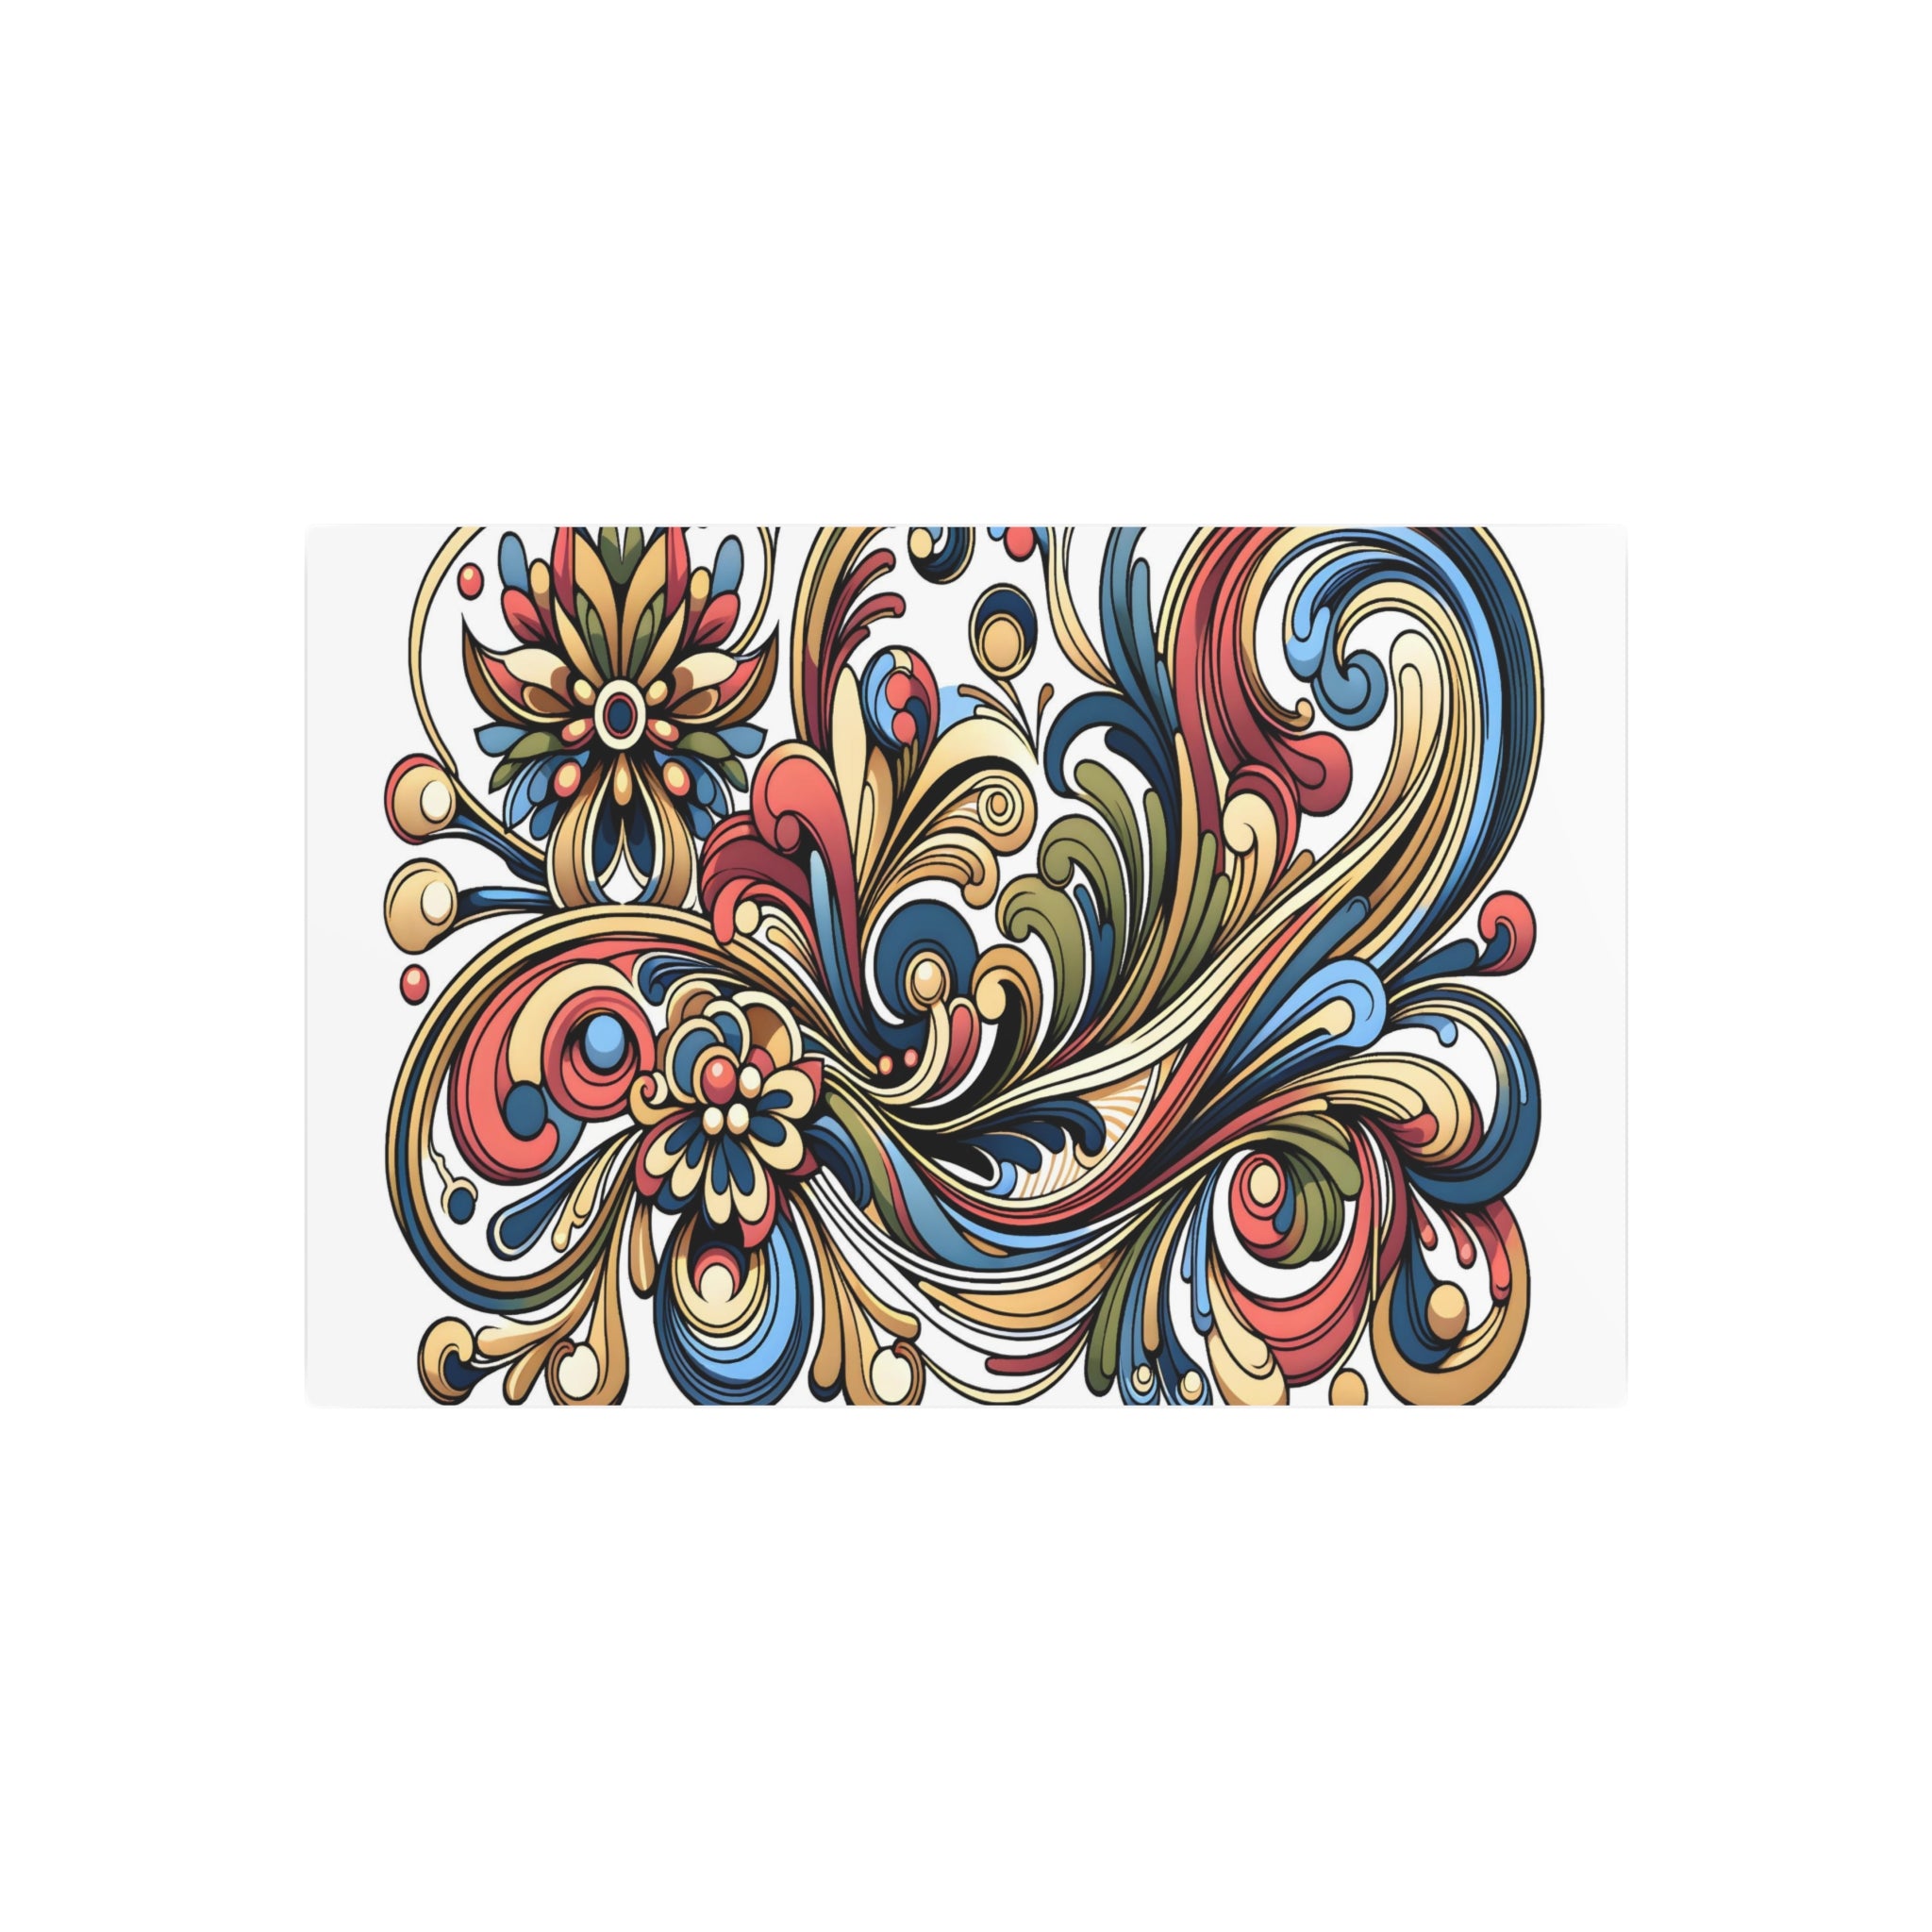 Metal Poster Art | "Art Nouveau Western Art Style - Brightly Colored Intricate Floral Design with Curvy Lines Print"